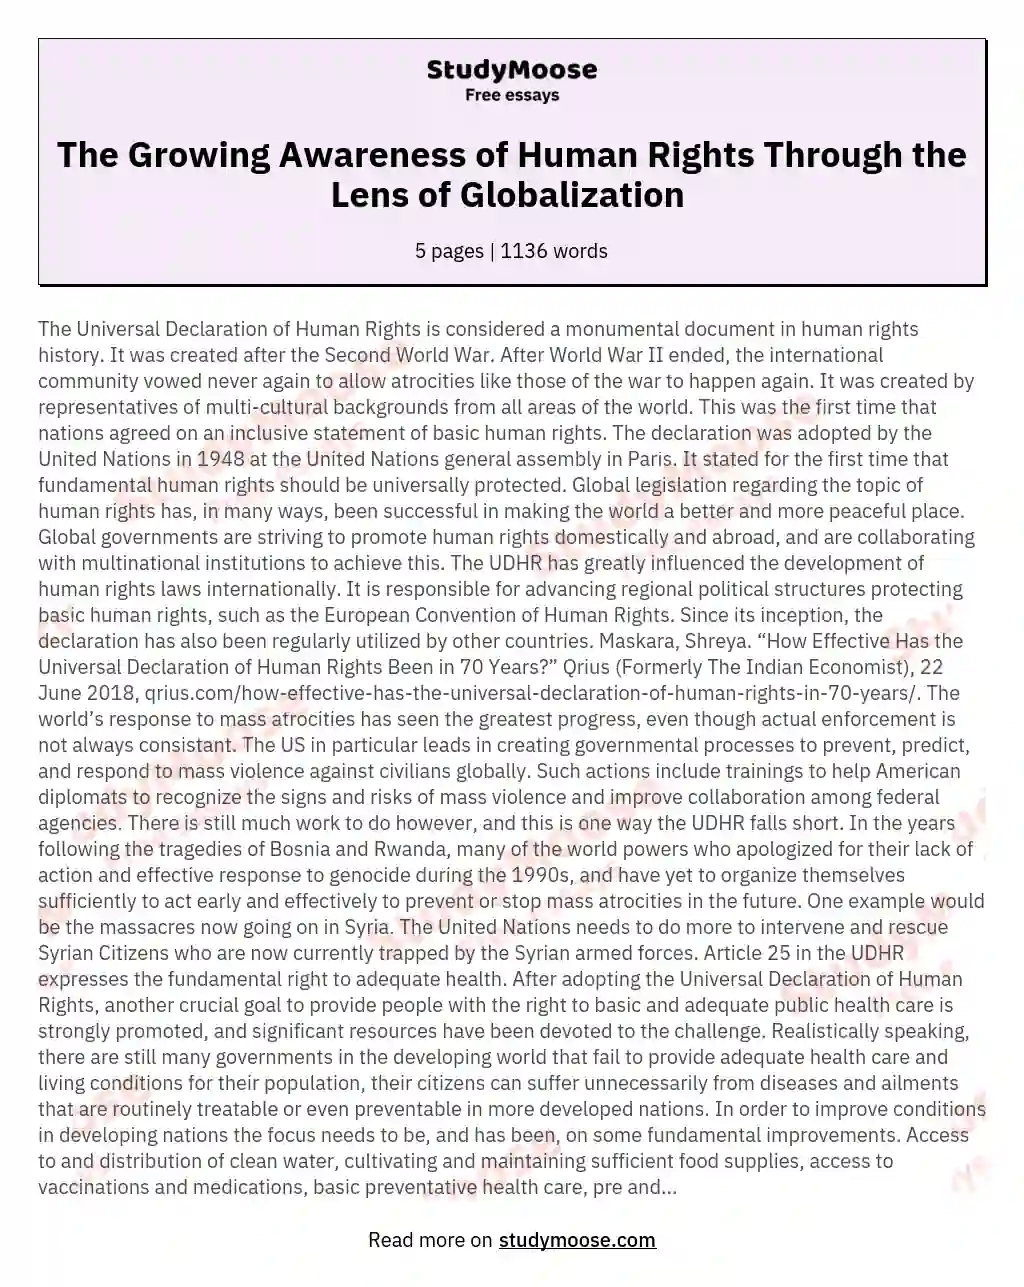 The Growing Awareness of Human Rights Through the Lens of Globalization  essay